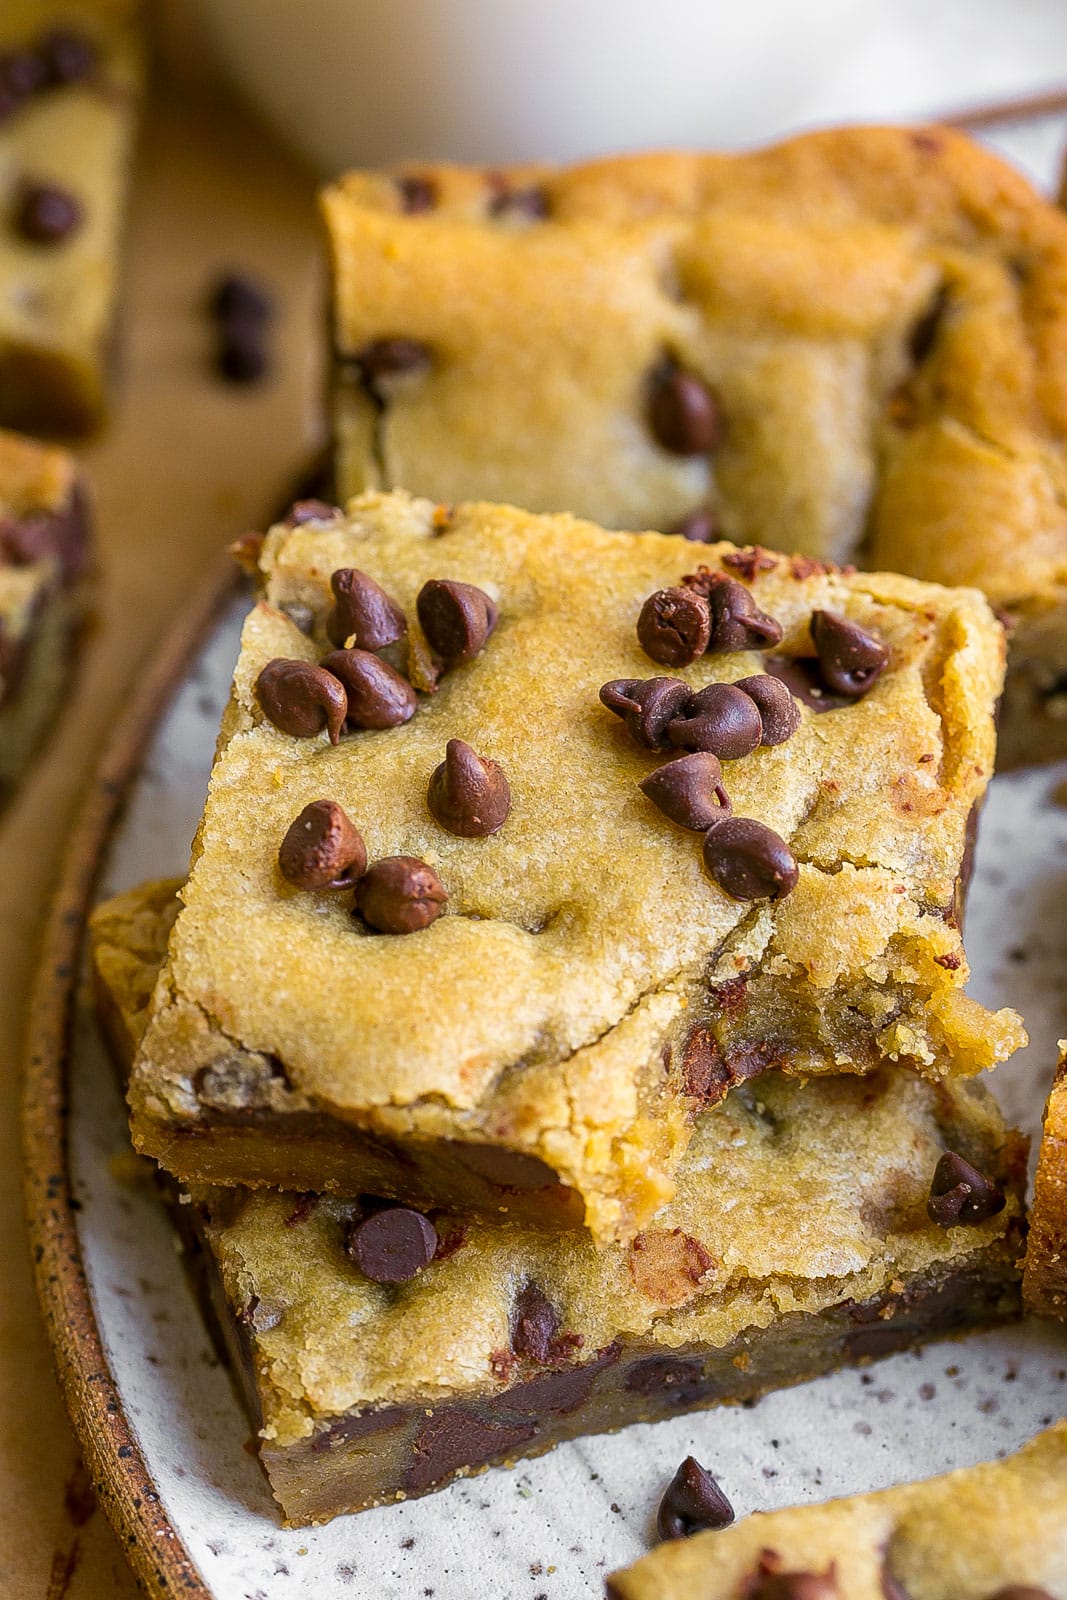 Cookie bars with chocolate chips and a bite mark.